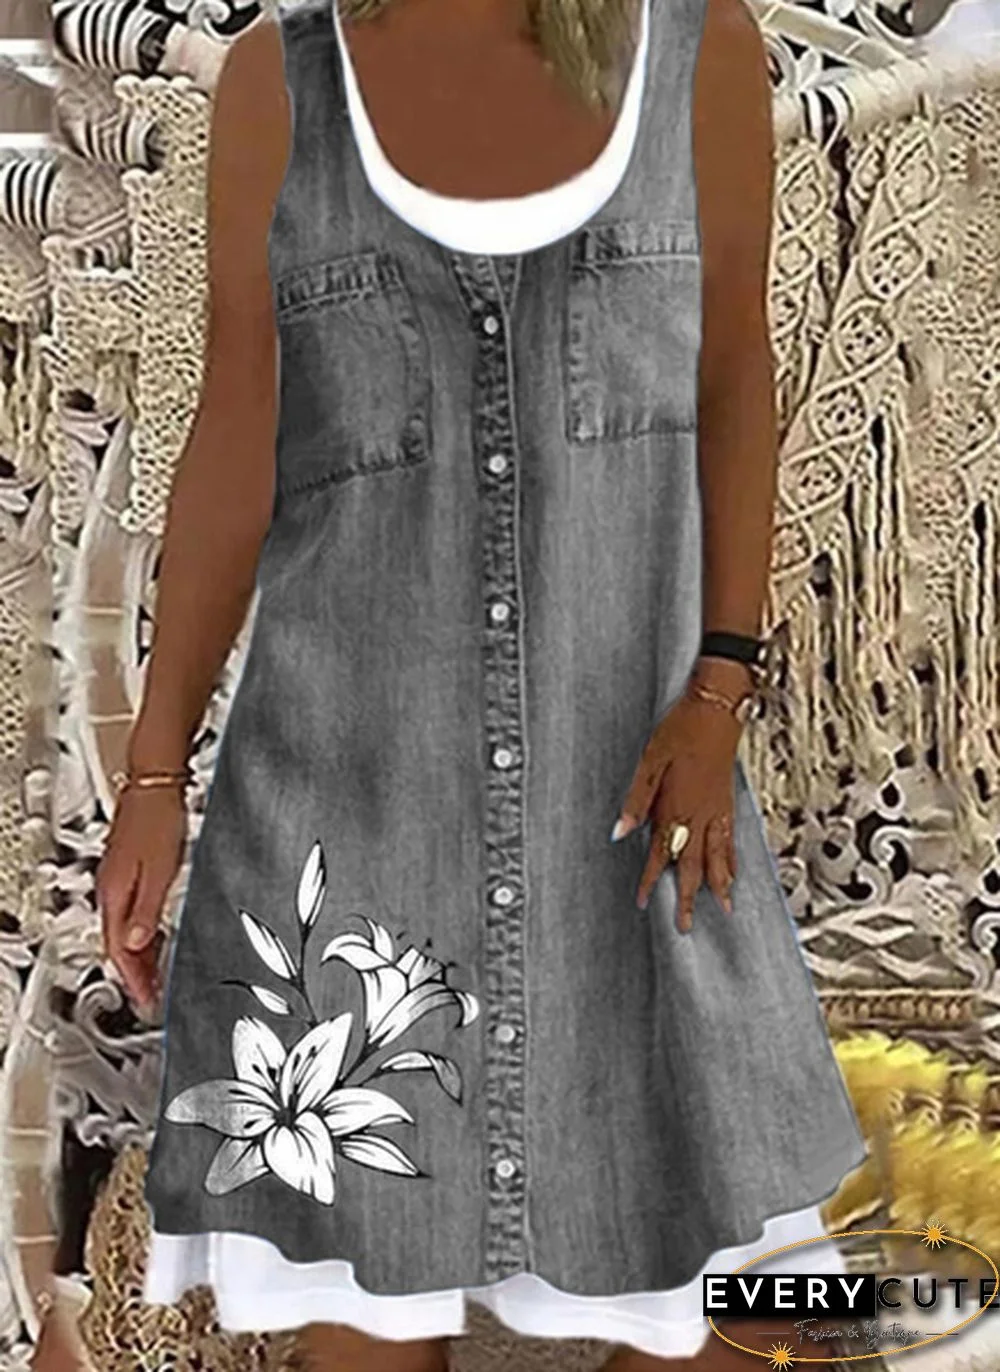 Women's Dress Summer New Fashion Women's Flower Denim Fake Two-piece Printed Casual Sleeveless Round Neck Dress Loose Plus Size Soft and Comfortable Summer Dress XS-5XL